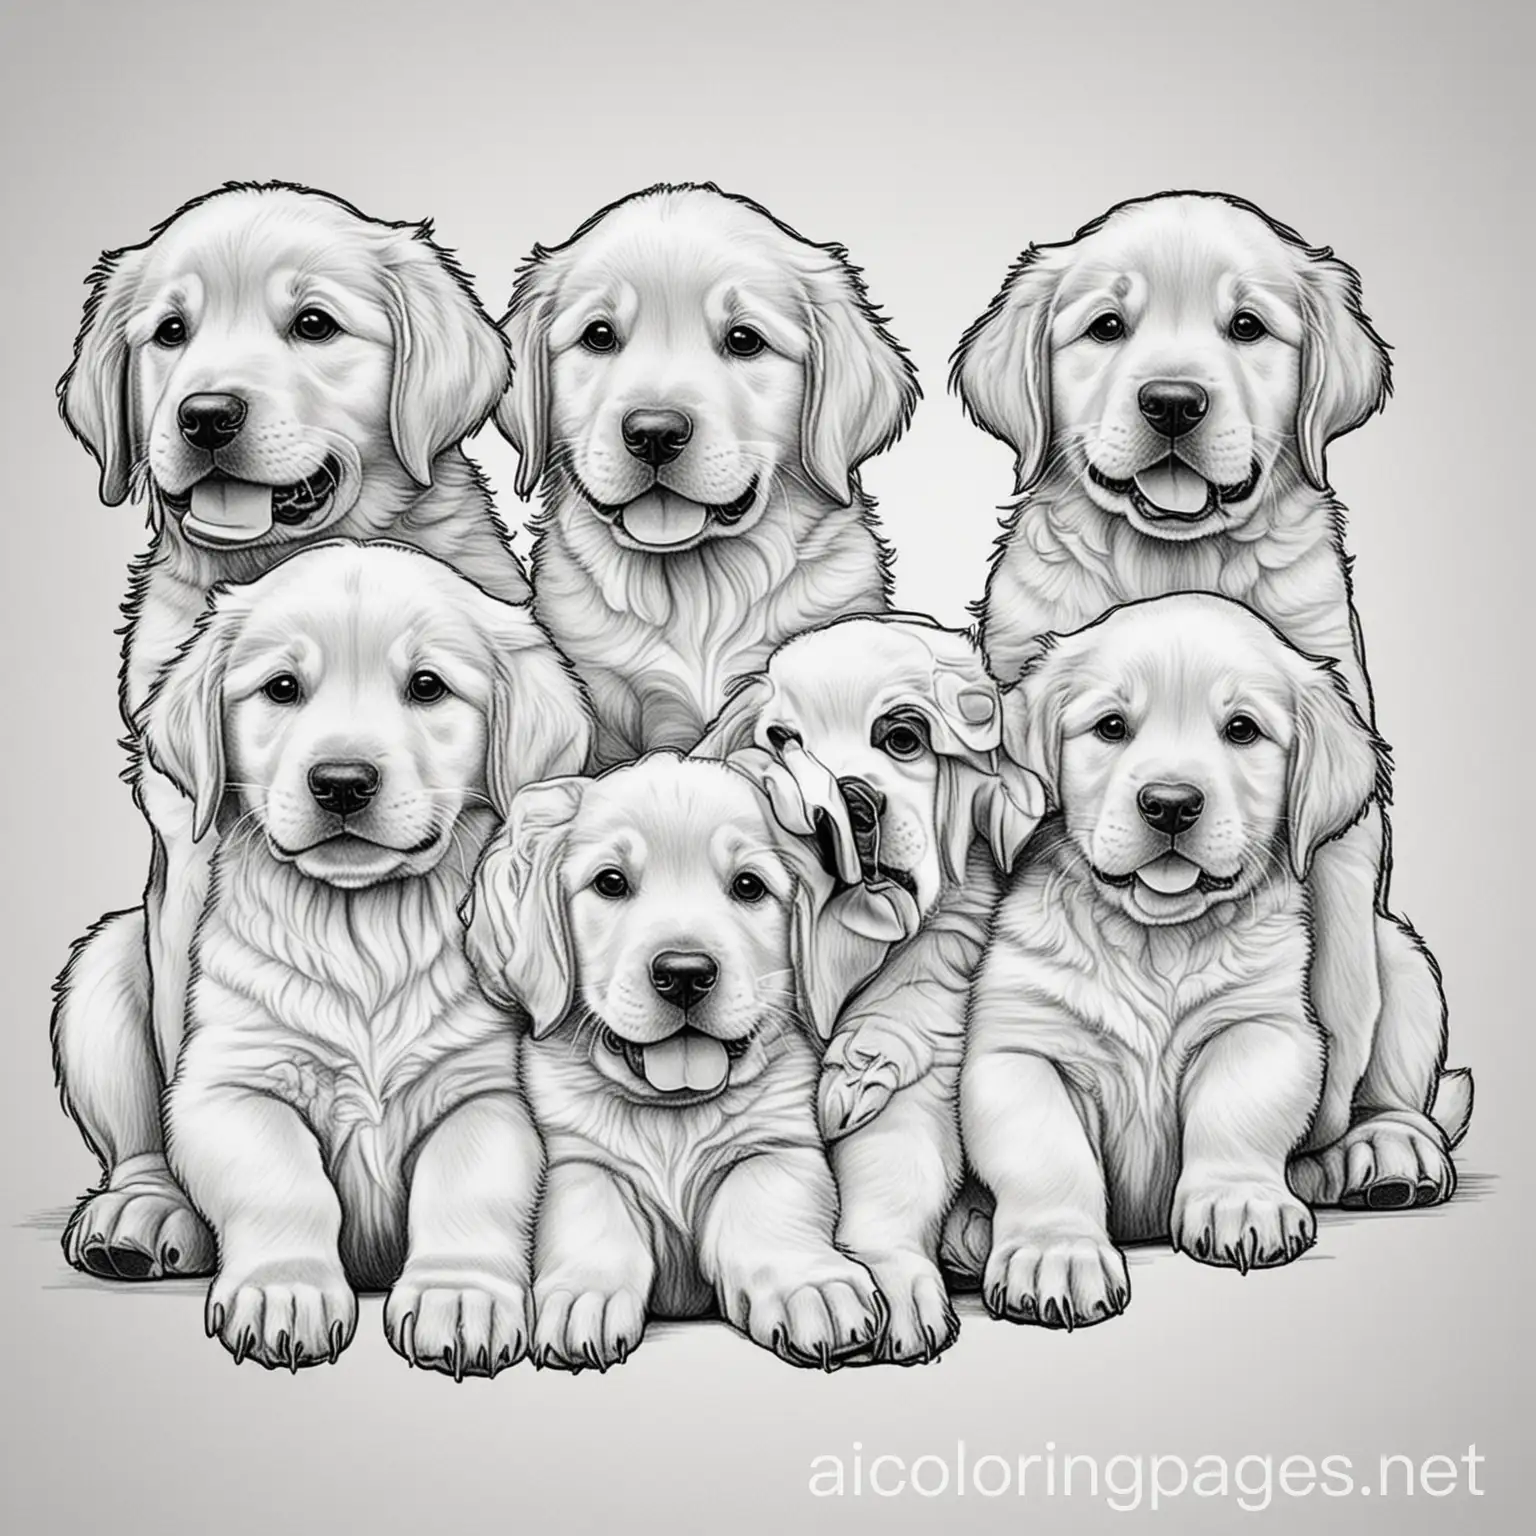 5 golden retriever puppies coloring page, Coloring Page, black and white, line art, white background, Simplicity, Ample White Space. The background of the coloring page is plain white to make it easy for young children to color within the lines. The outlines of all the subjects are easy to distinguish, making it simple for kids to color without too much difficulty